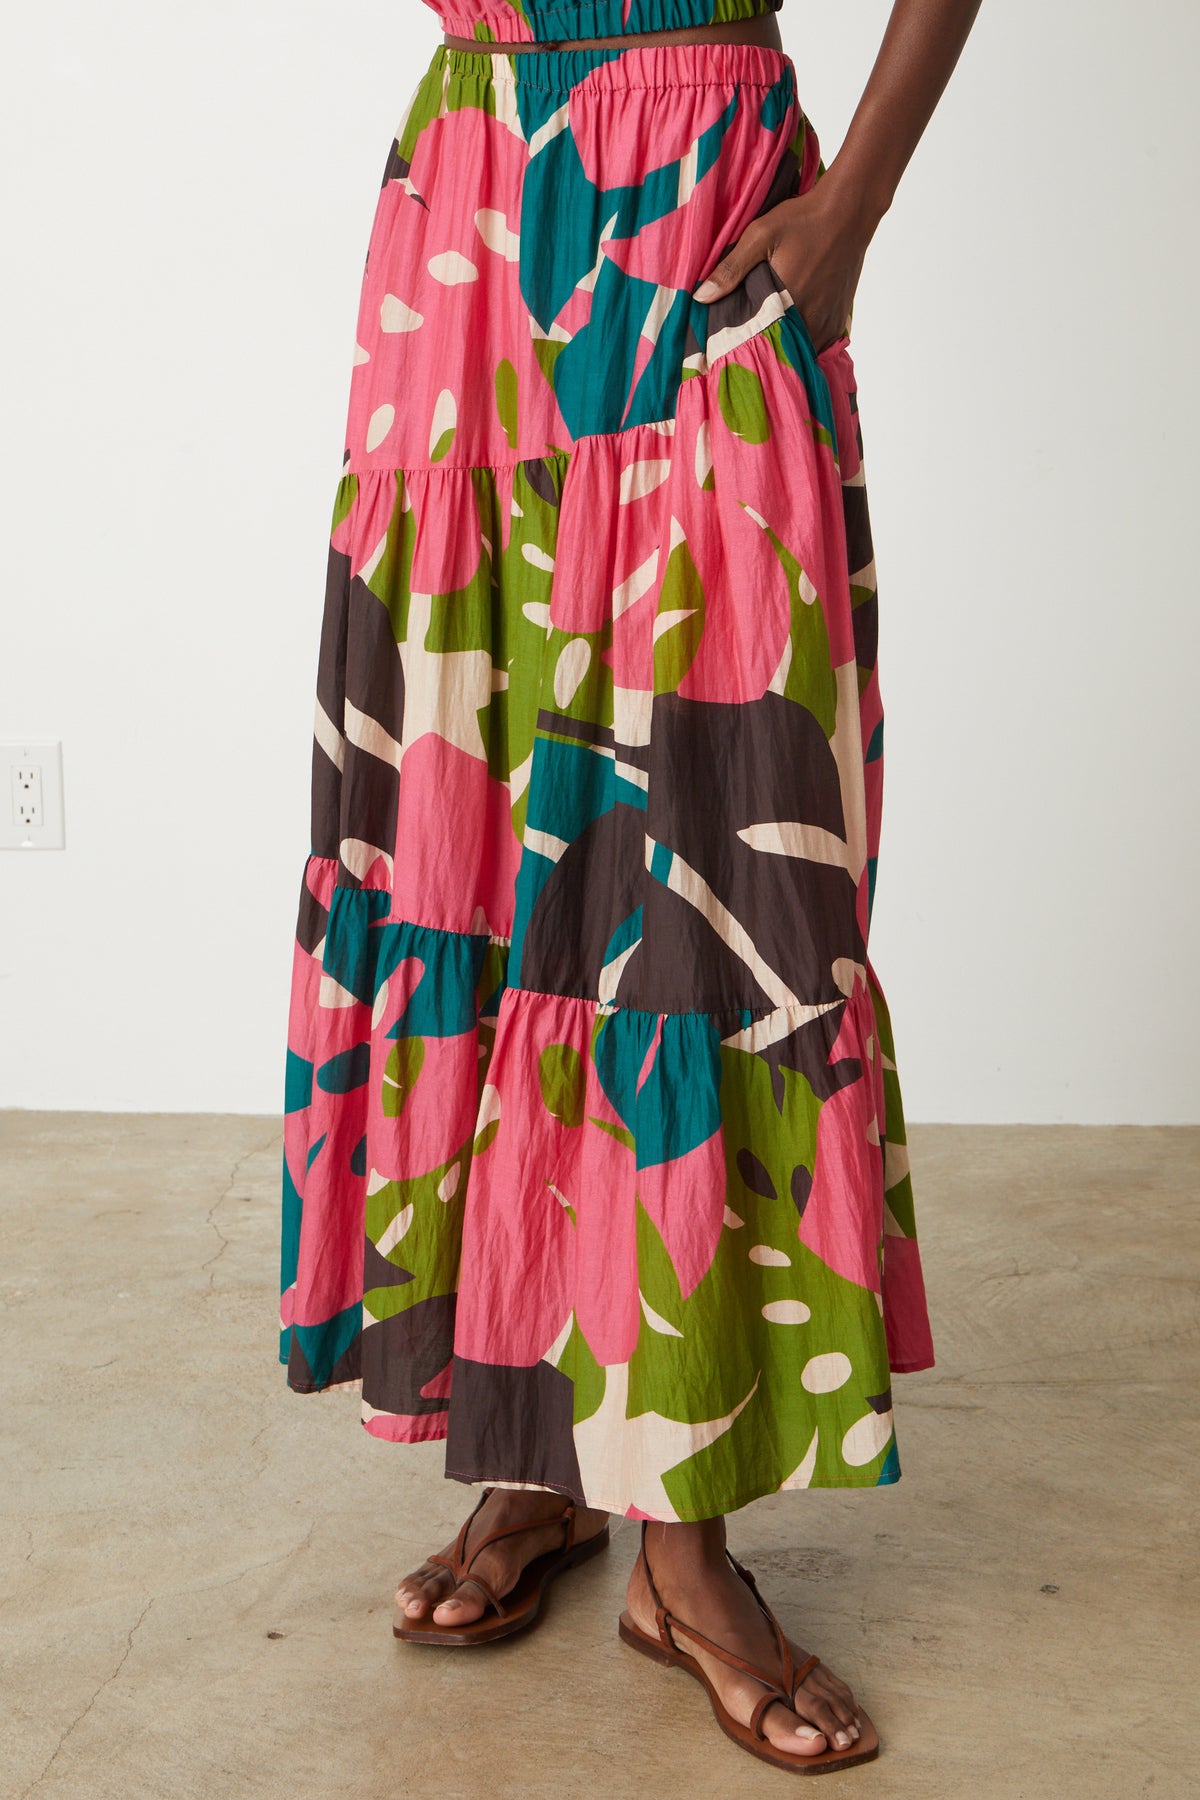 A woman wearing a pink, green, and blue printed tiered skirt.-26514115166401